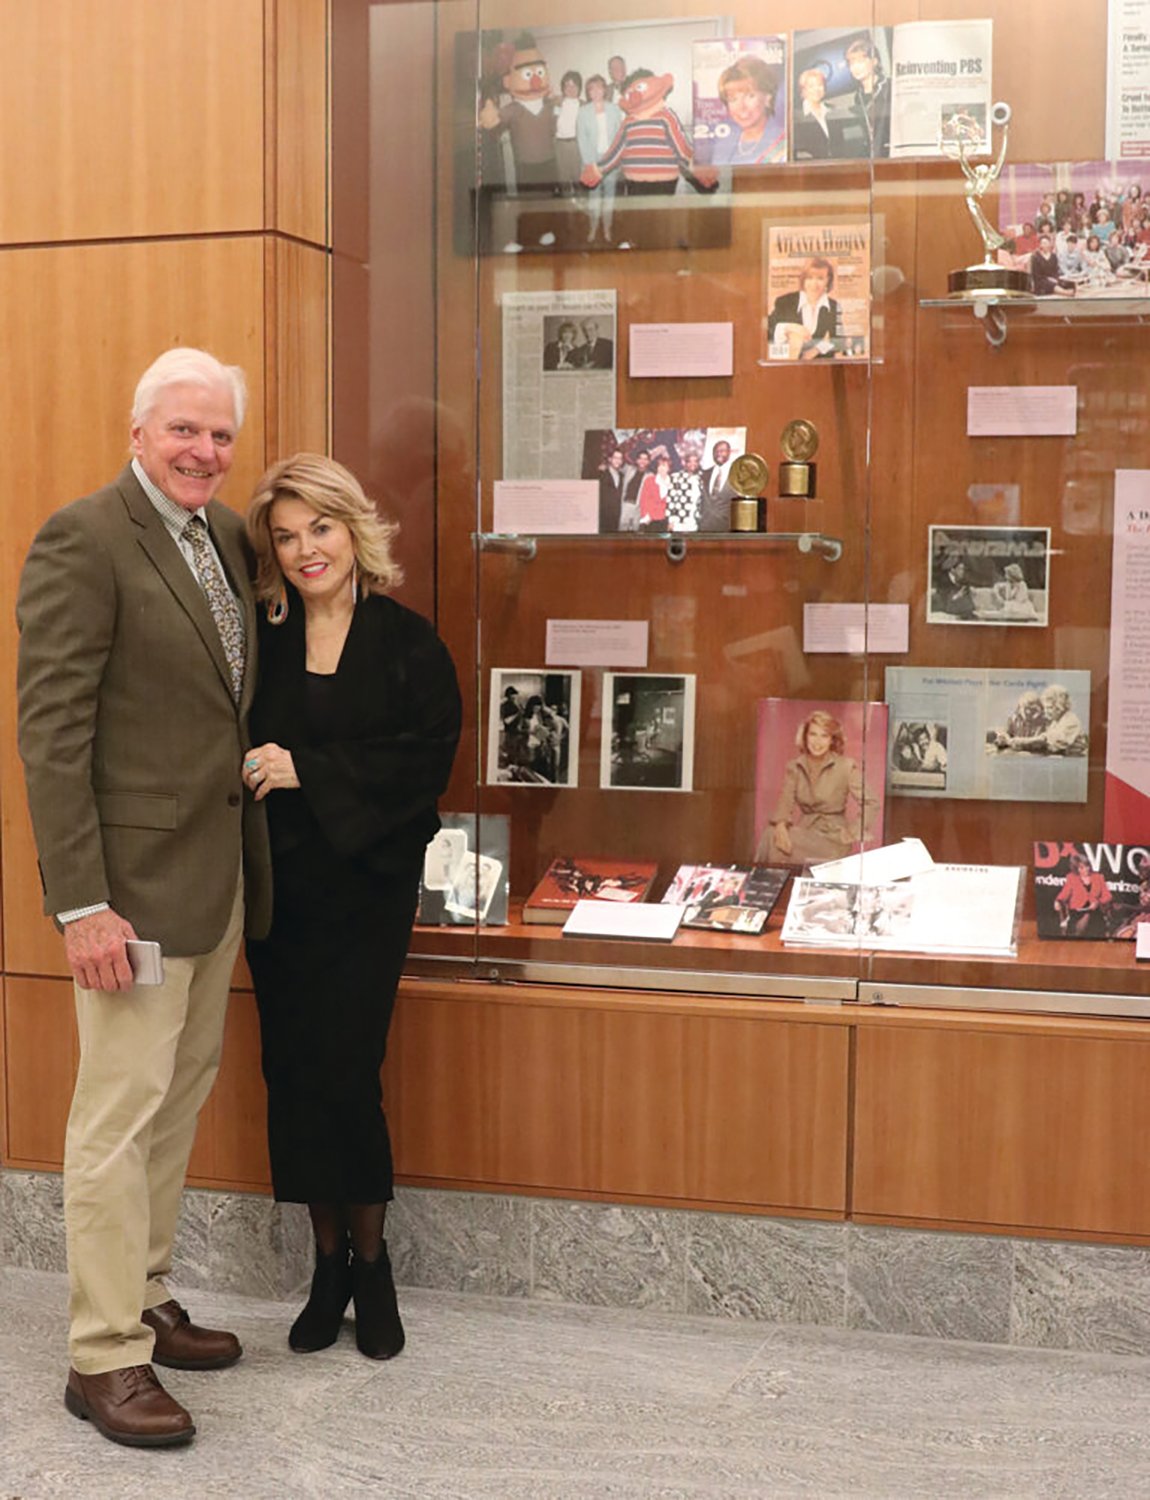 Pat Mitchell, a UGA alumna and past president of PBS and CNN productions, spoke at the UGA Special Collections Libraries on Nov. 4, 2019. She was introduced by her former classmate Tom Johnson (ABJ ’63), who then talked with her about her new book, “A Dangerous Woman.”..Photo: Sarah E. Freeman.